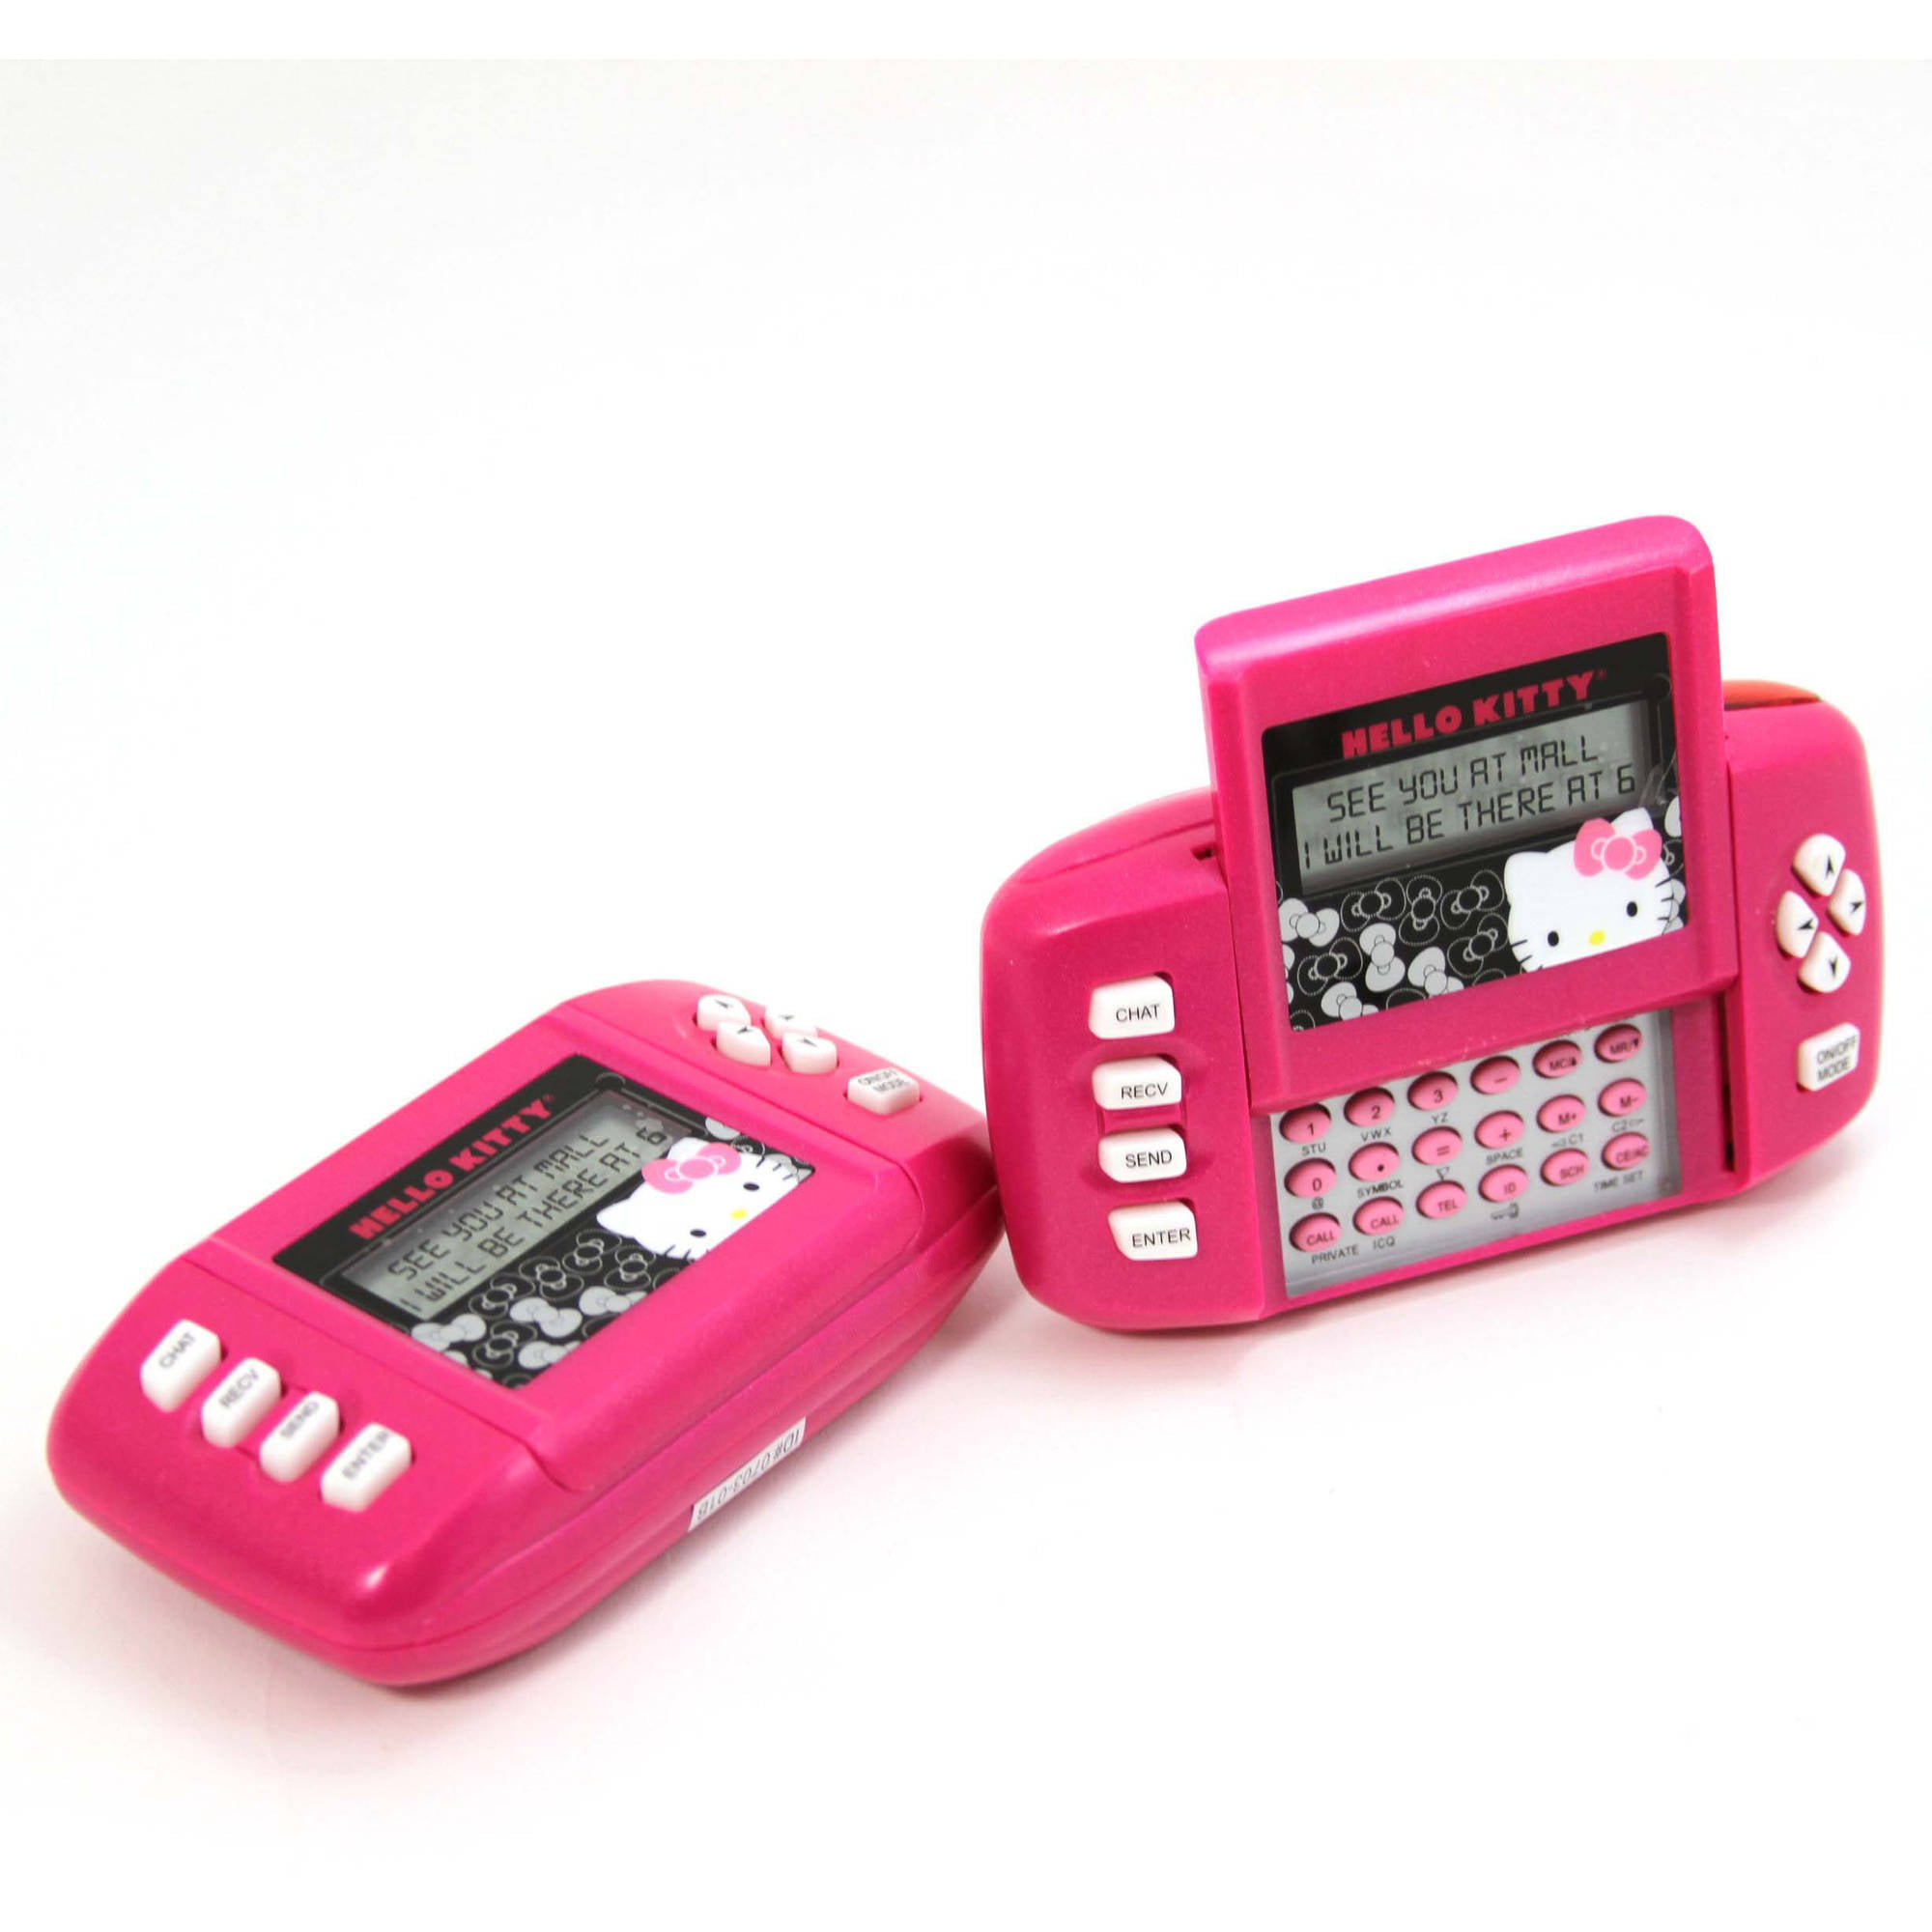 Hello Kitty SMS Text Messenger by Sanrio Pink 2008